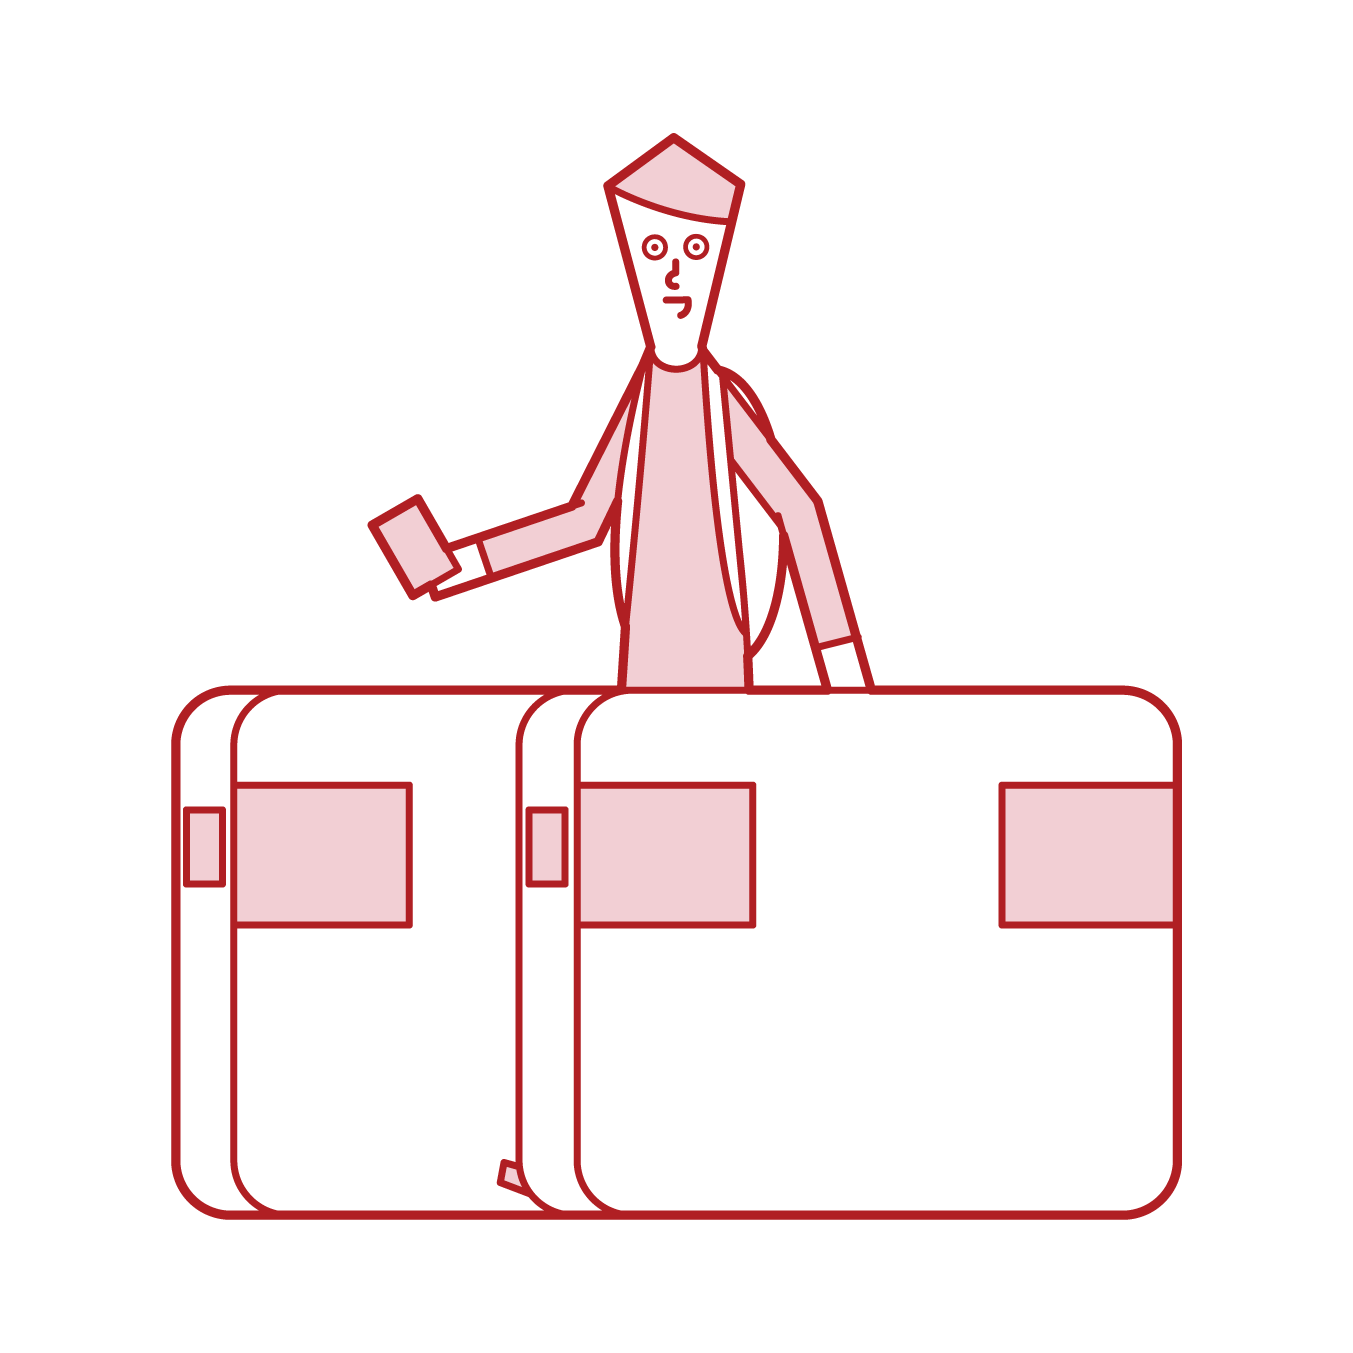 Illustration of a man passing through the ticket gate of a station